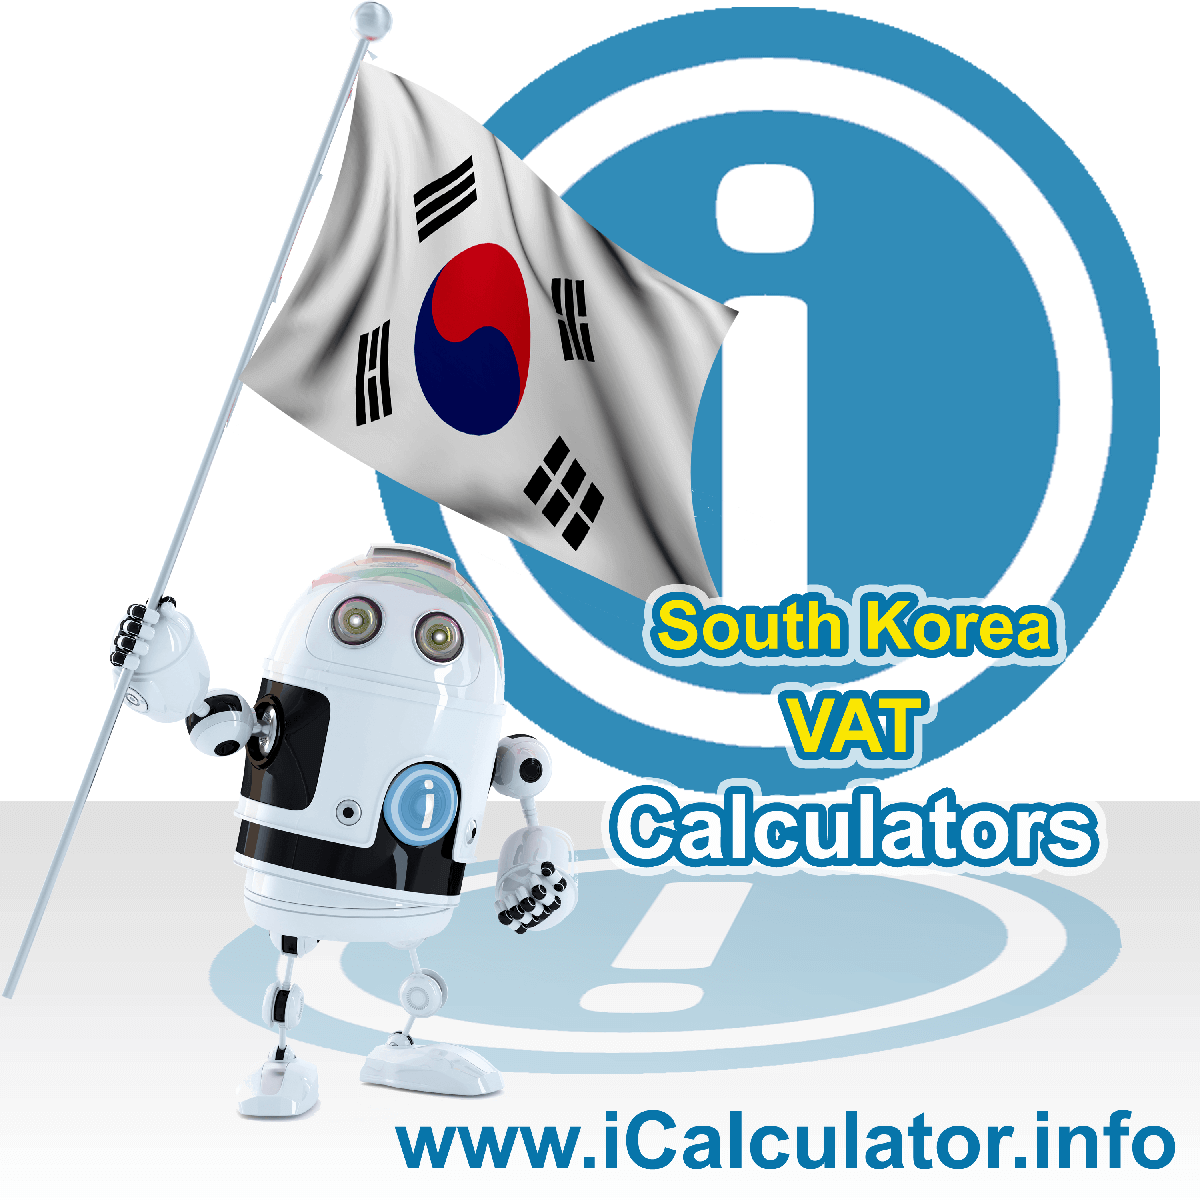 South Korea VAT Calculator. This image shows the South Korea flag and information relating to the VAT formula used for calculating Value Added Tax in South Korea using the South Korea VAT Calculator in 2023